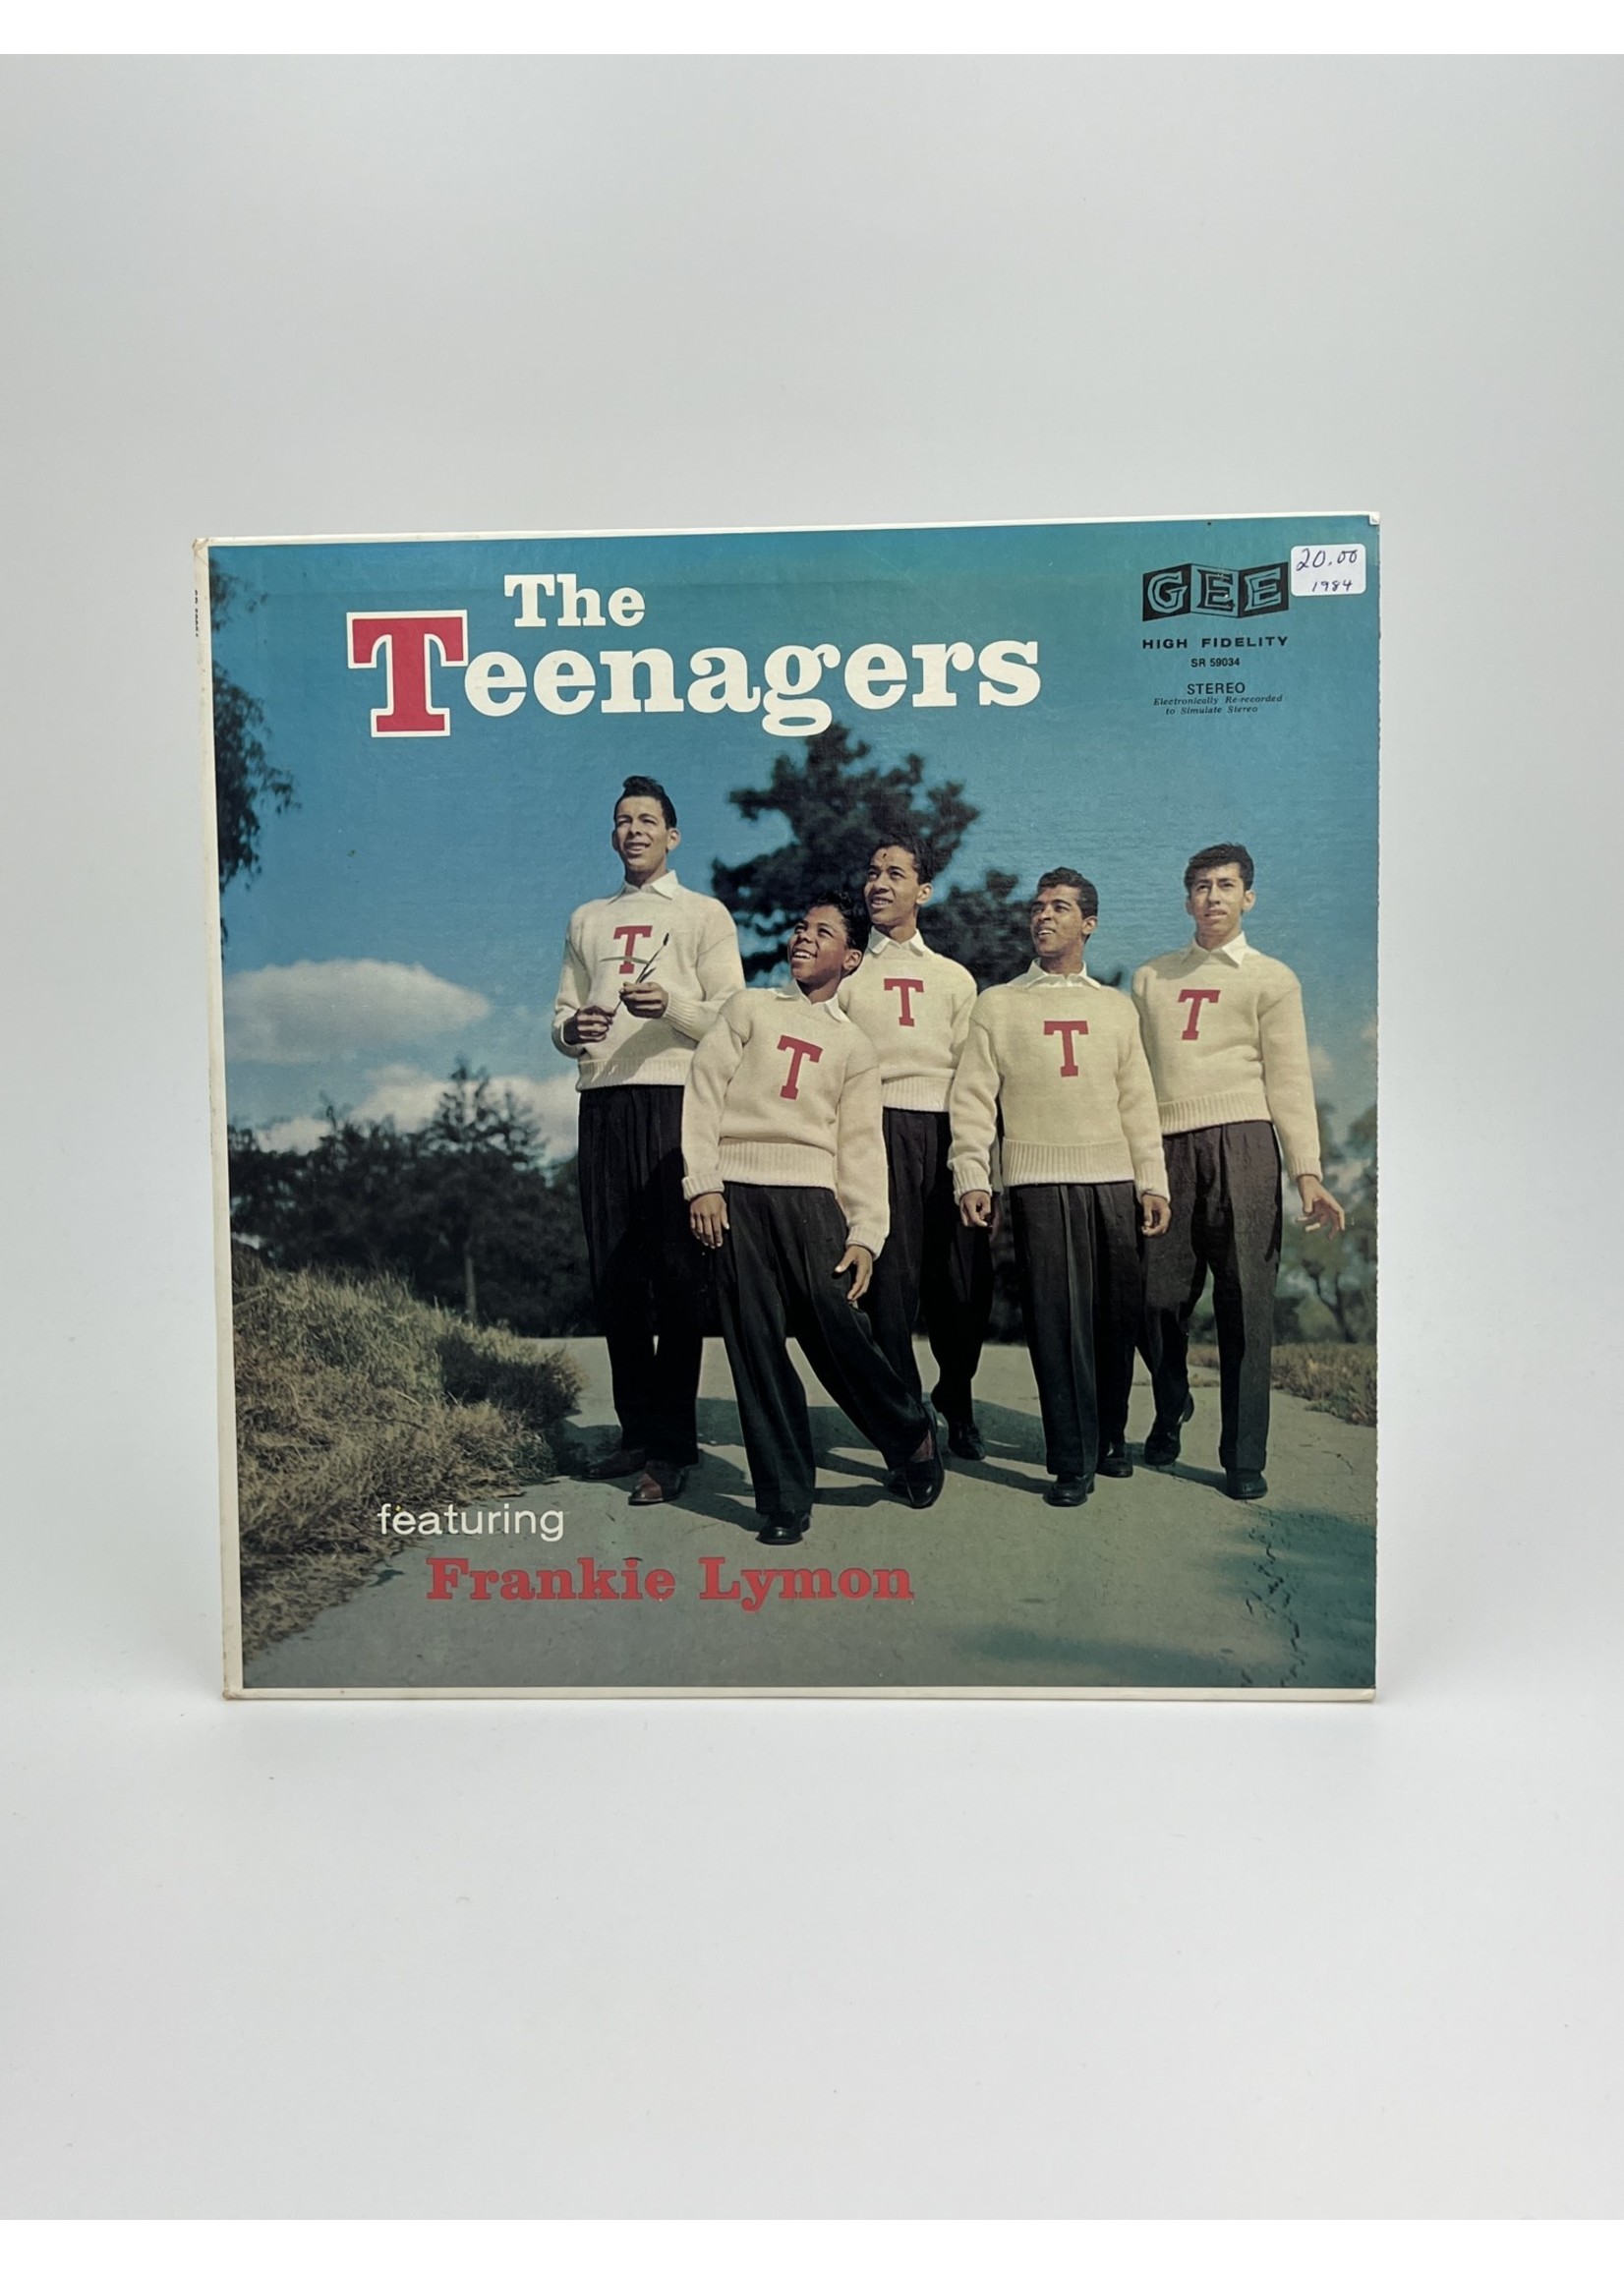 LP The Teenagers Featuring Frankie Lymon LP Record